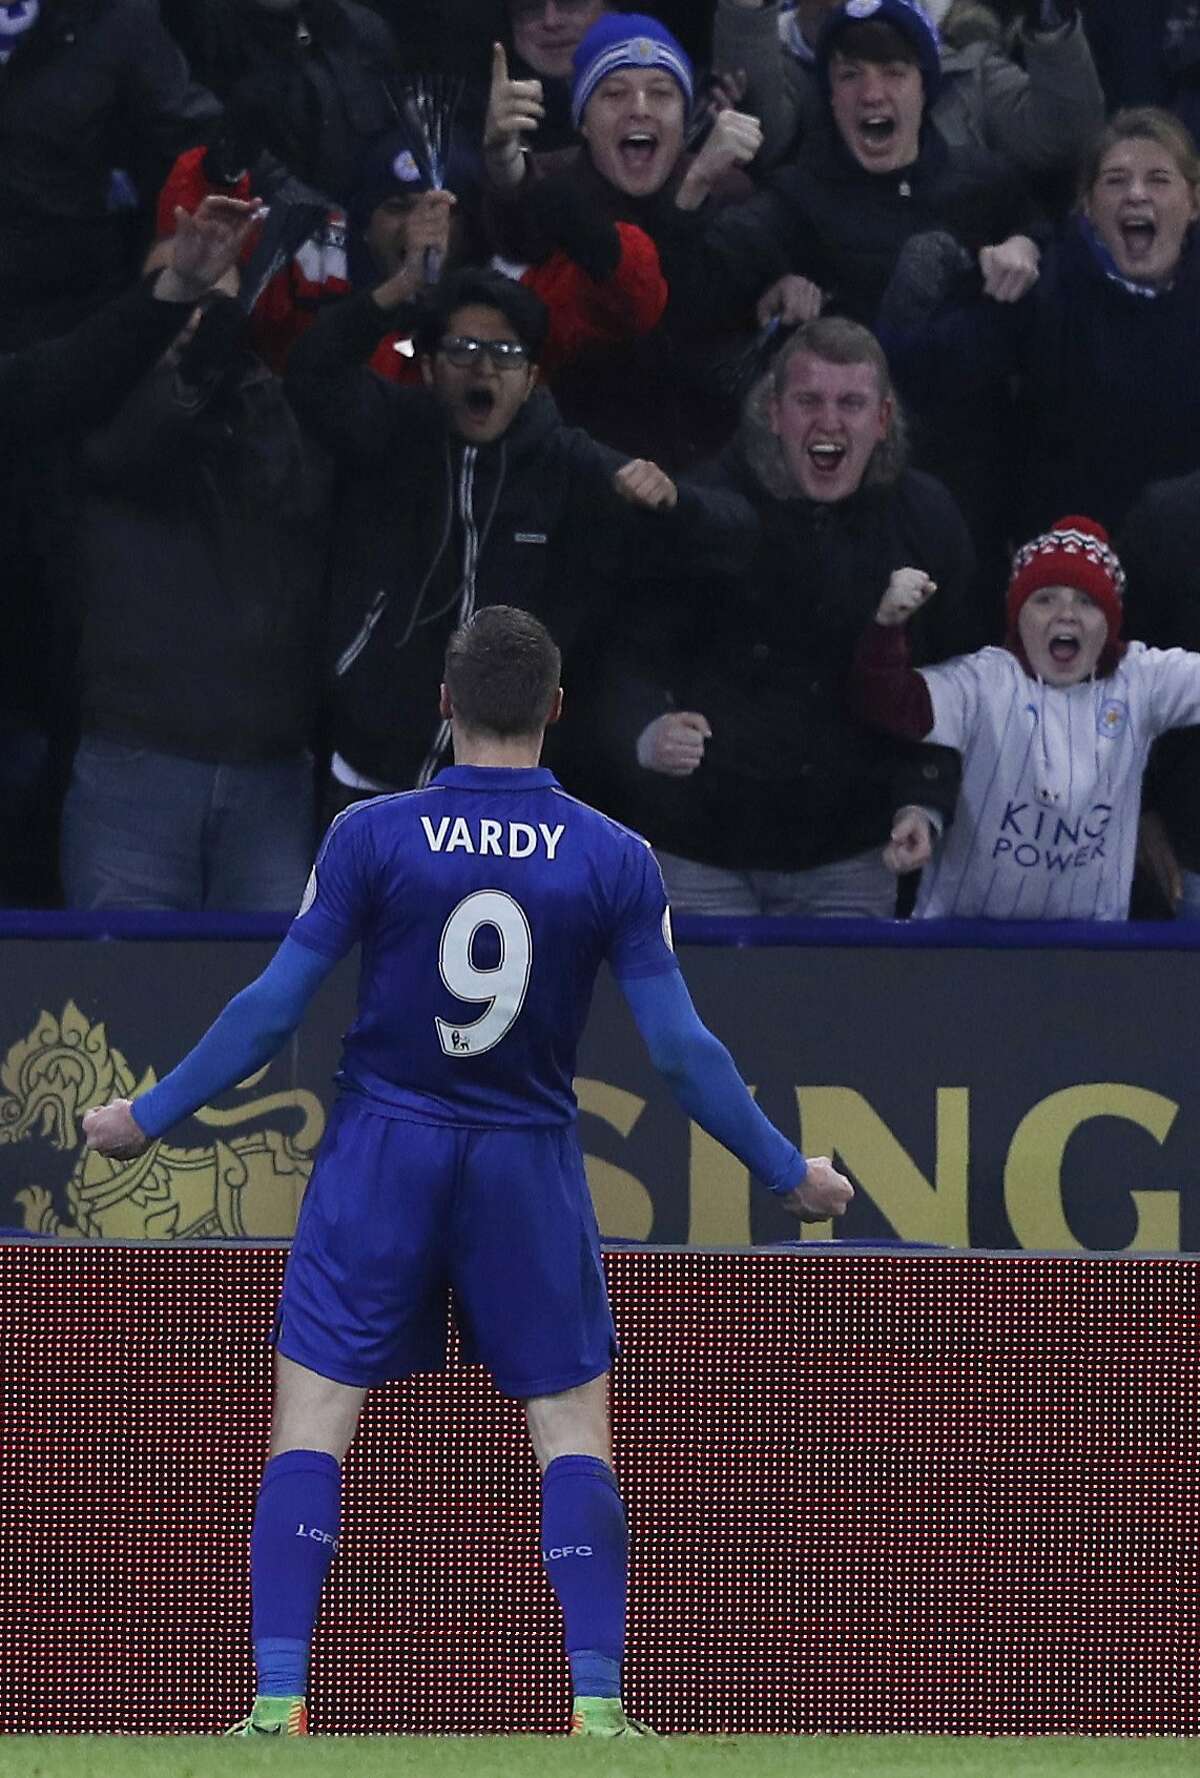 Leicester City's English striker Jamie Vardy celebrates scoring his team's third goal during the English Premier League football match between Leicester City and Liverpool at King Power Stadium in Leicester, central England on February 27, 2017. / AFP PHOTO / ADRIAN DENNIS / RESTRICTED TO EDITORIAL USE. No use with unauthorized audio, video, data, fixture lists, club/league logos or 'live' services. Online in-match use limited to 75 images, no video emulation. No use in betting, games or single club/league/player publications. / ADRIAN DENNIS/AFP/Getty Images